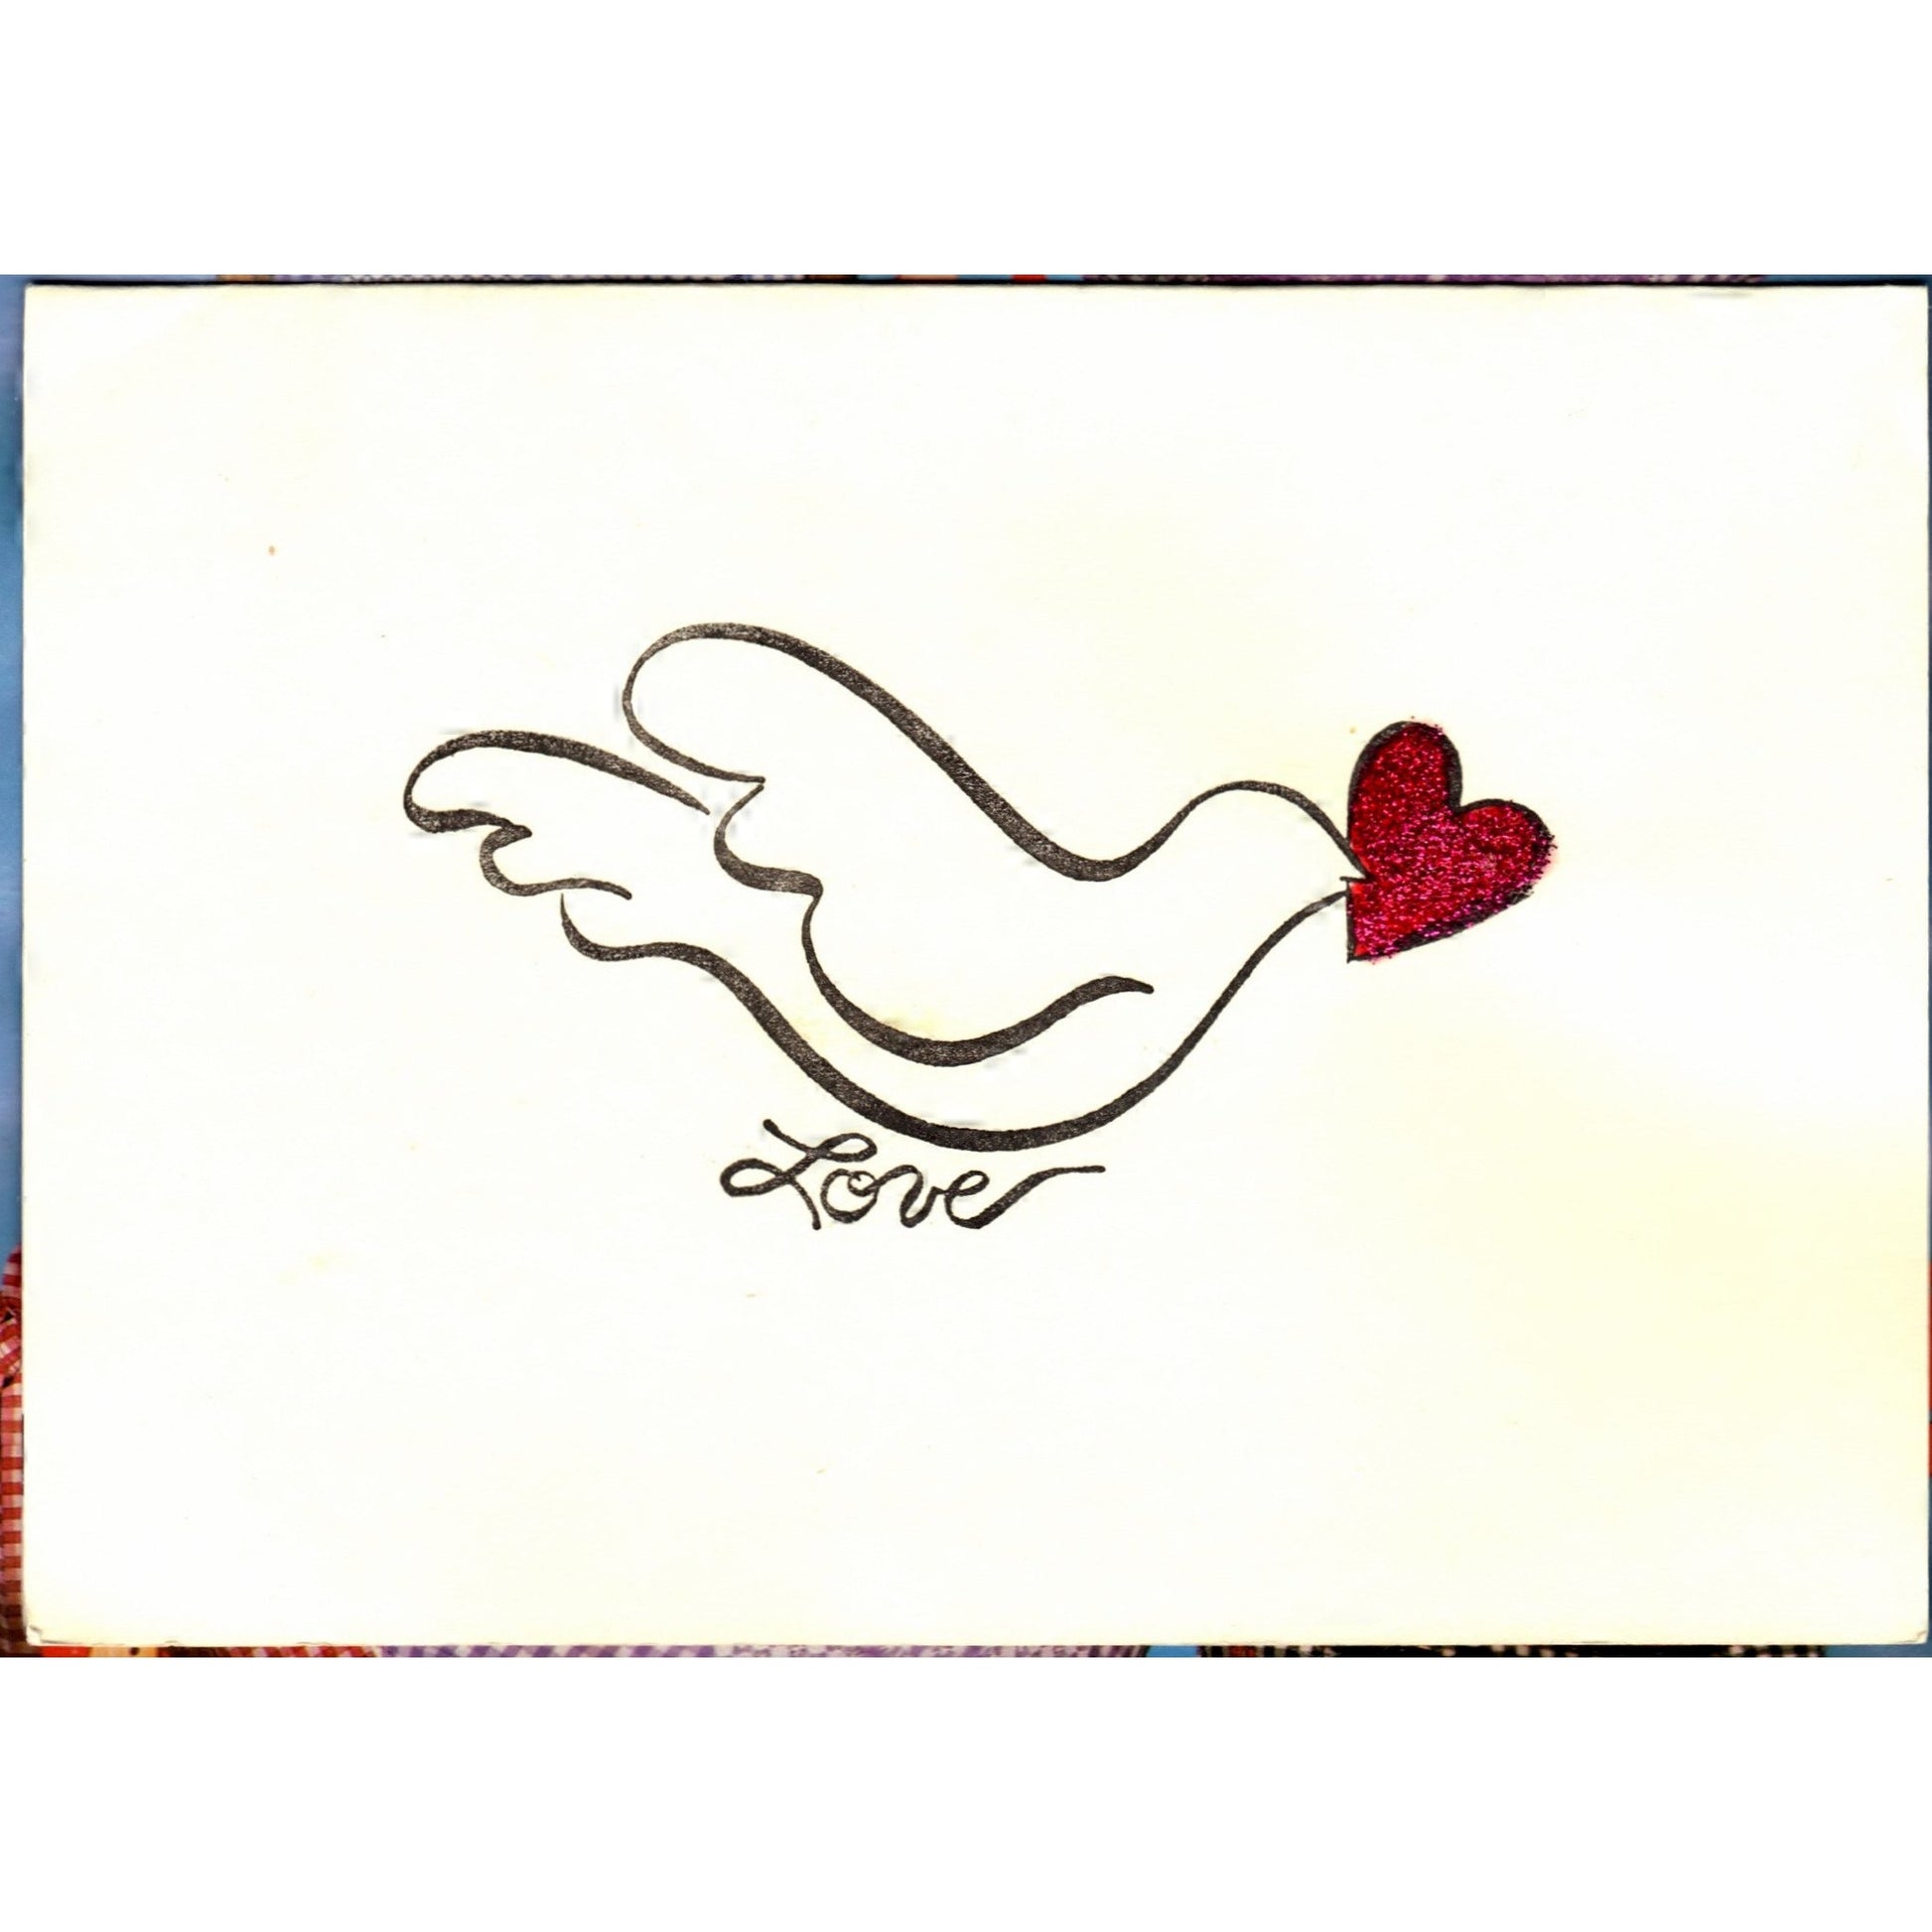 Lovey Dovey Handmade Good Greeting Supply Card - Cards And Other Paper Products - Made In U.S.A. - SharPharMade - 1